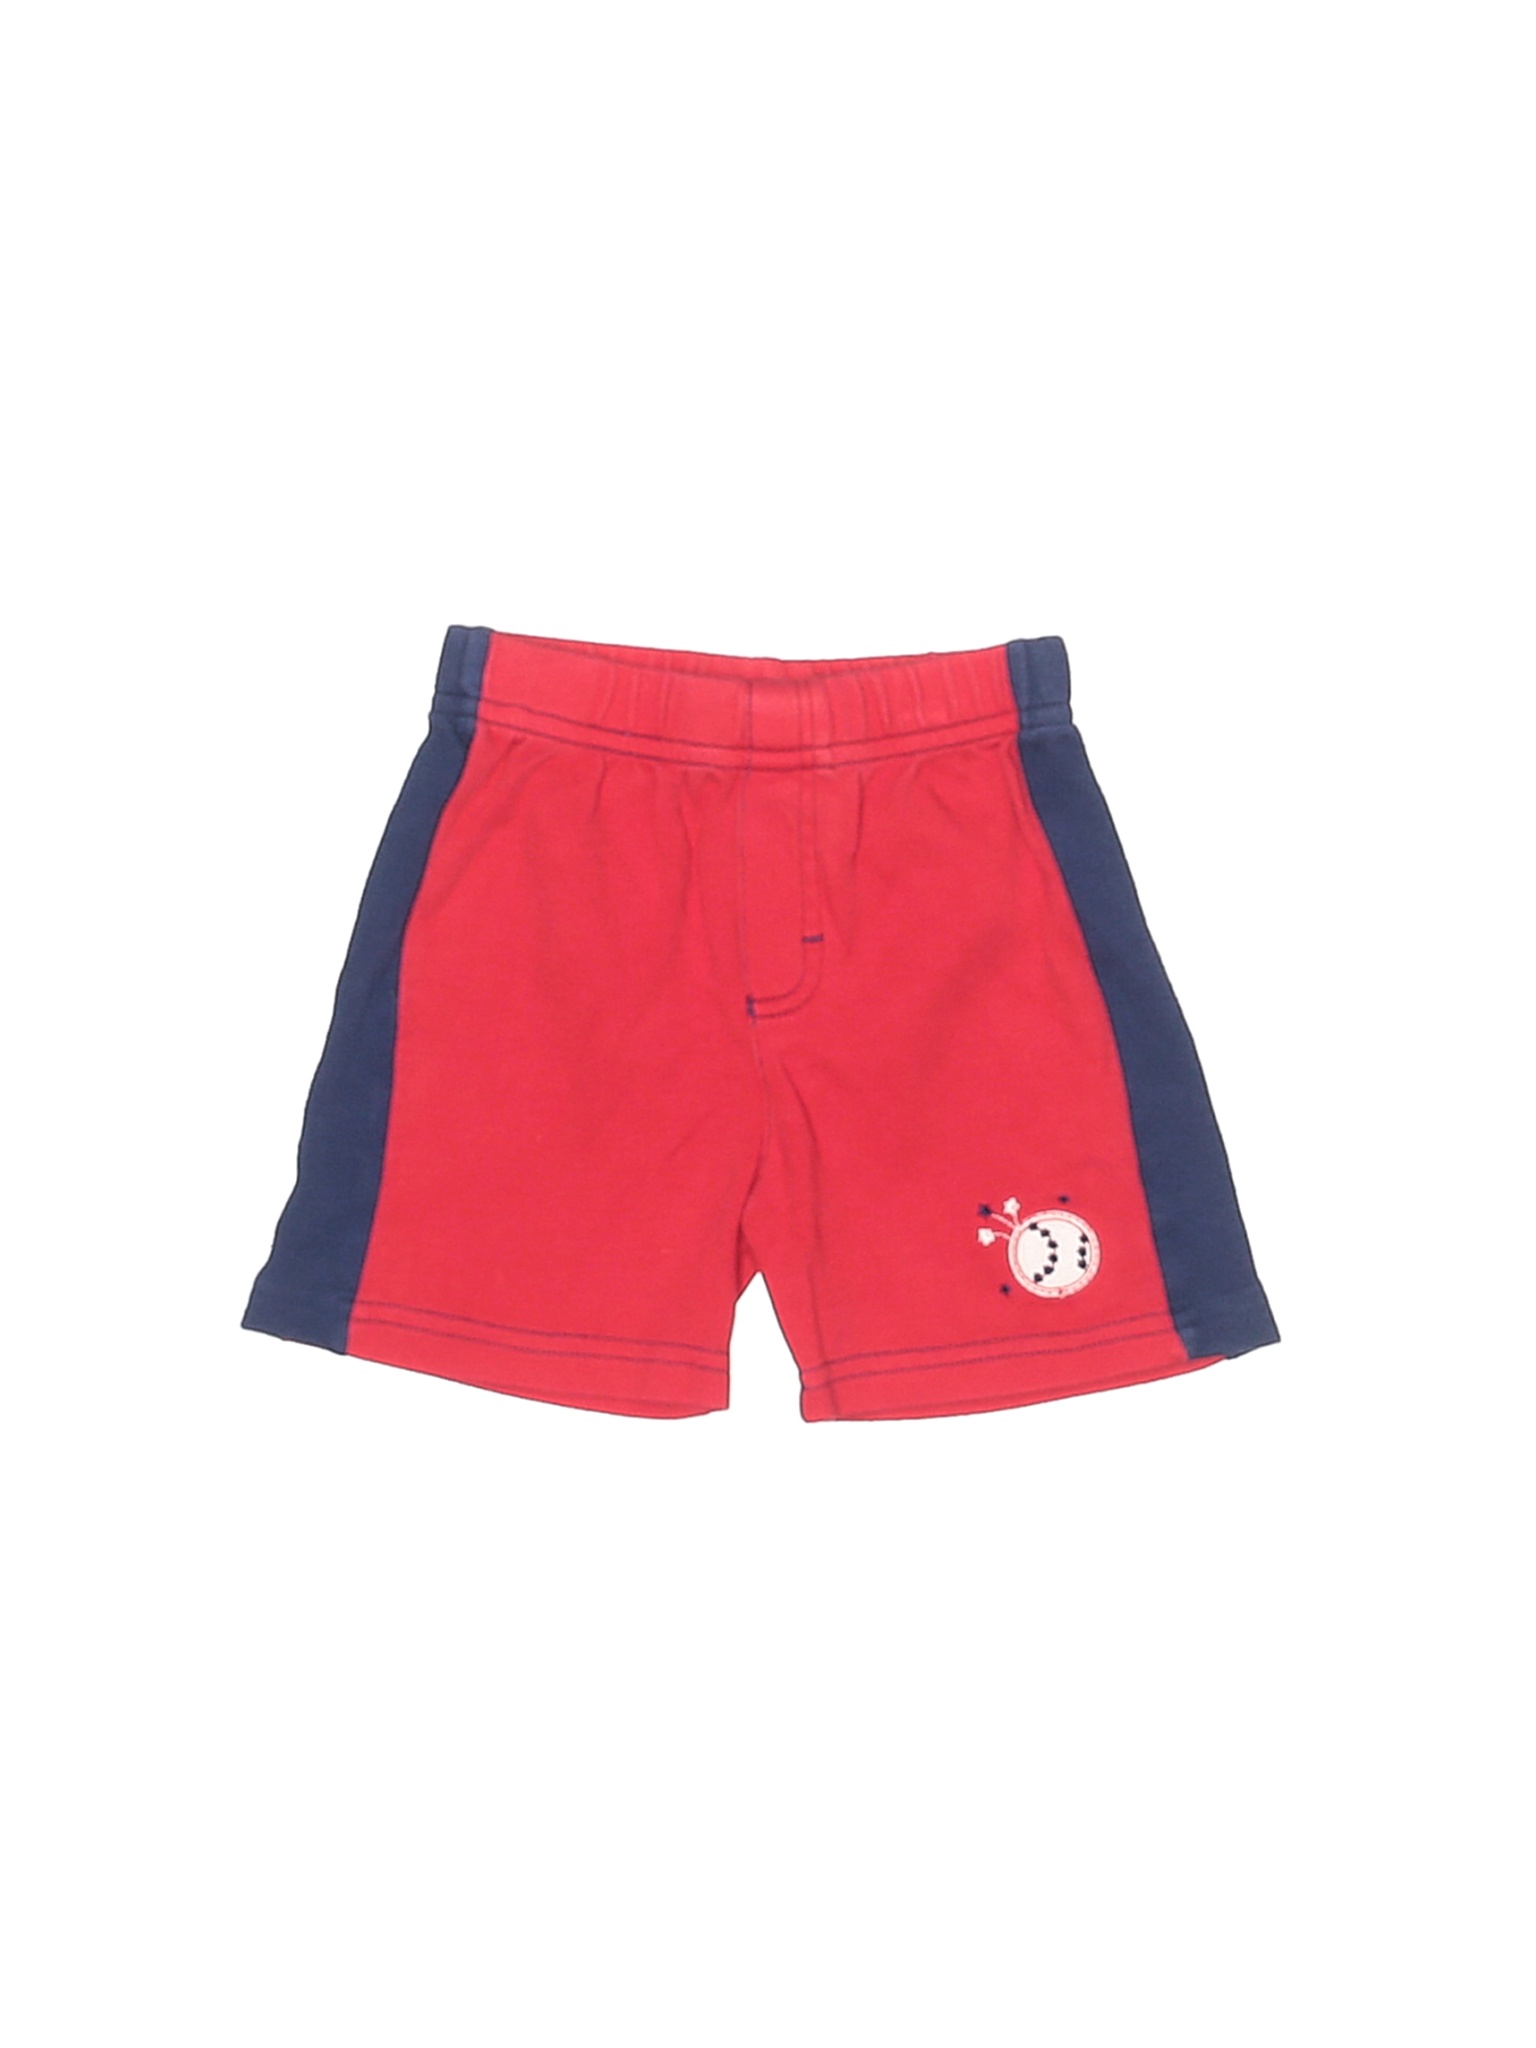 Unbranded Boys Red Shorts 6-9 Months | eBay